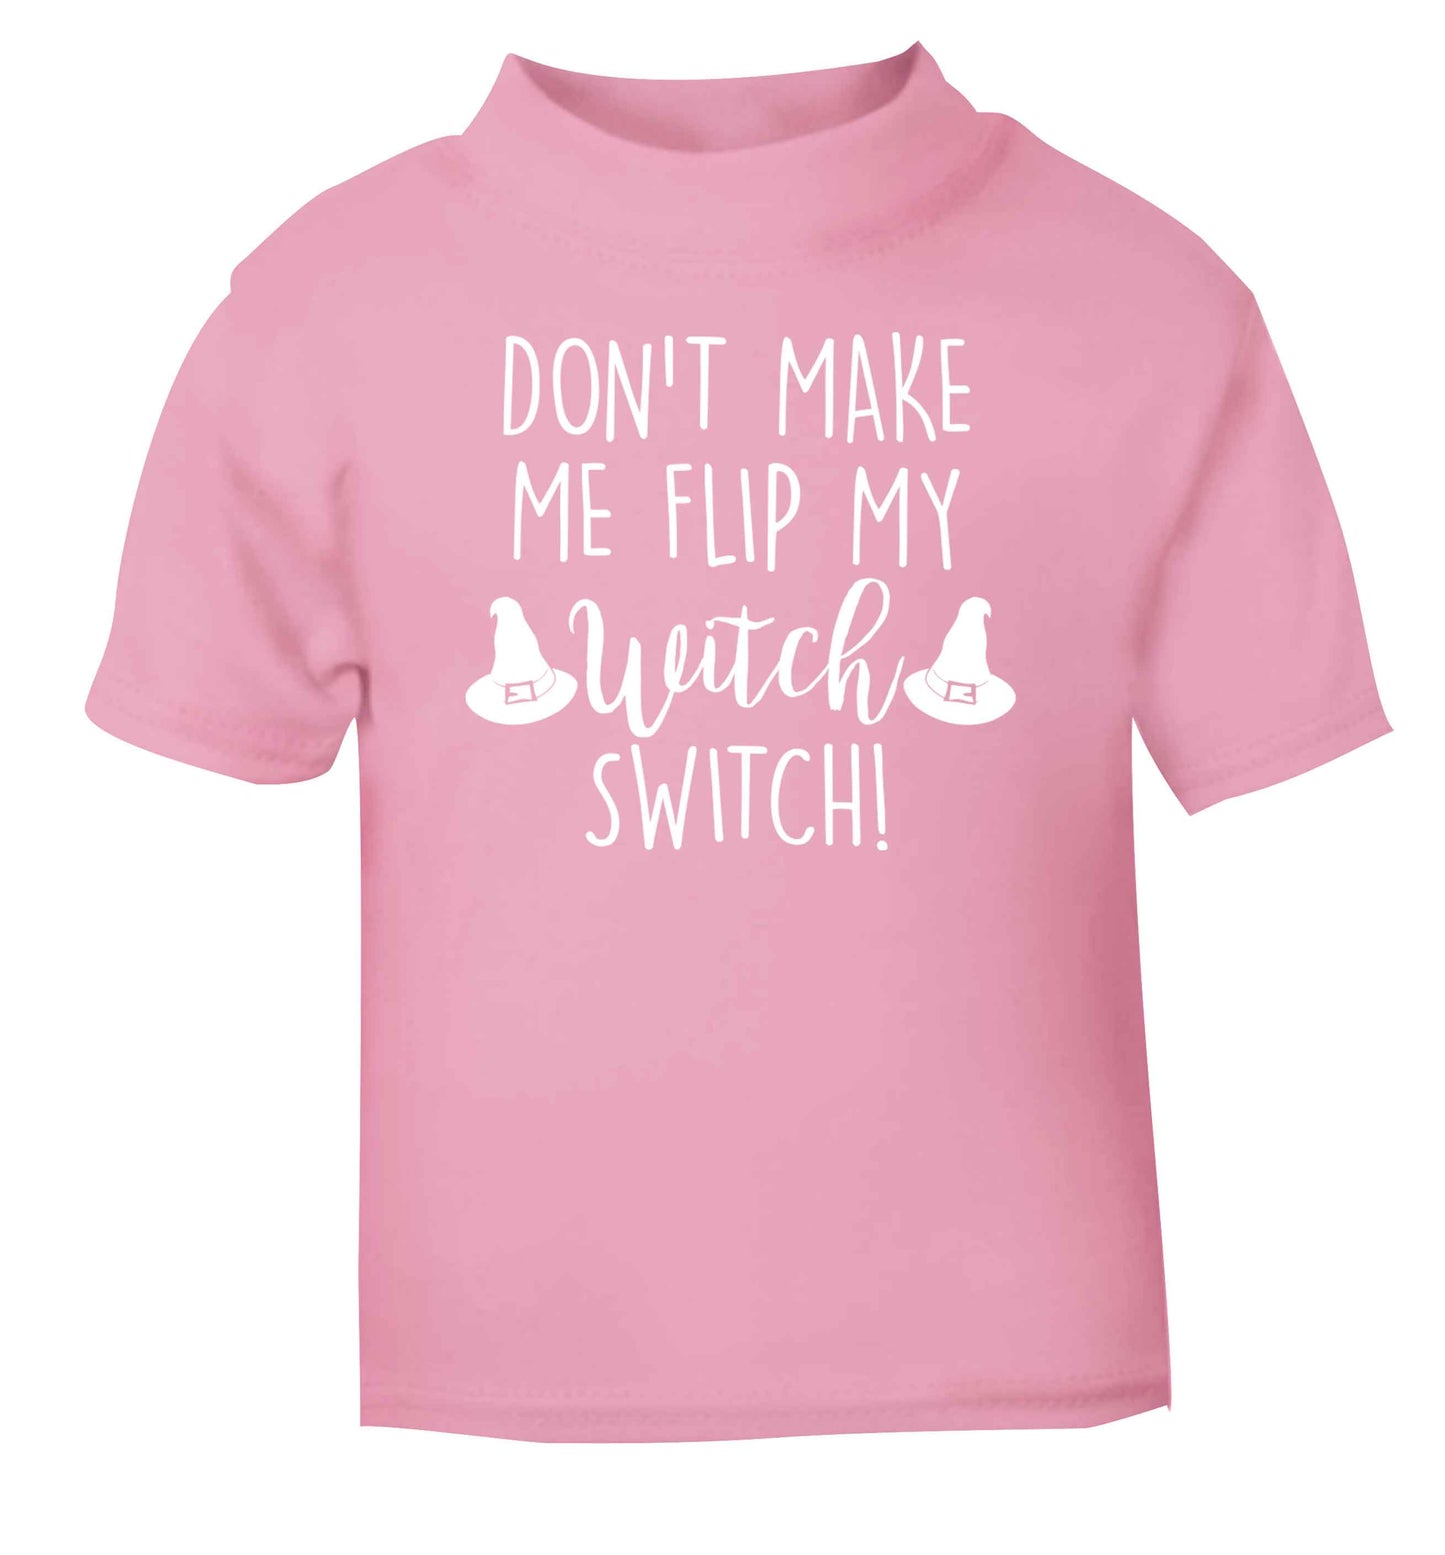 Don't make me flip my witch switch light pink baby toddler Tshirt 2 Years